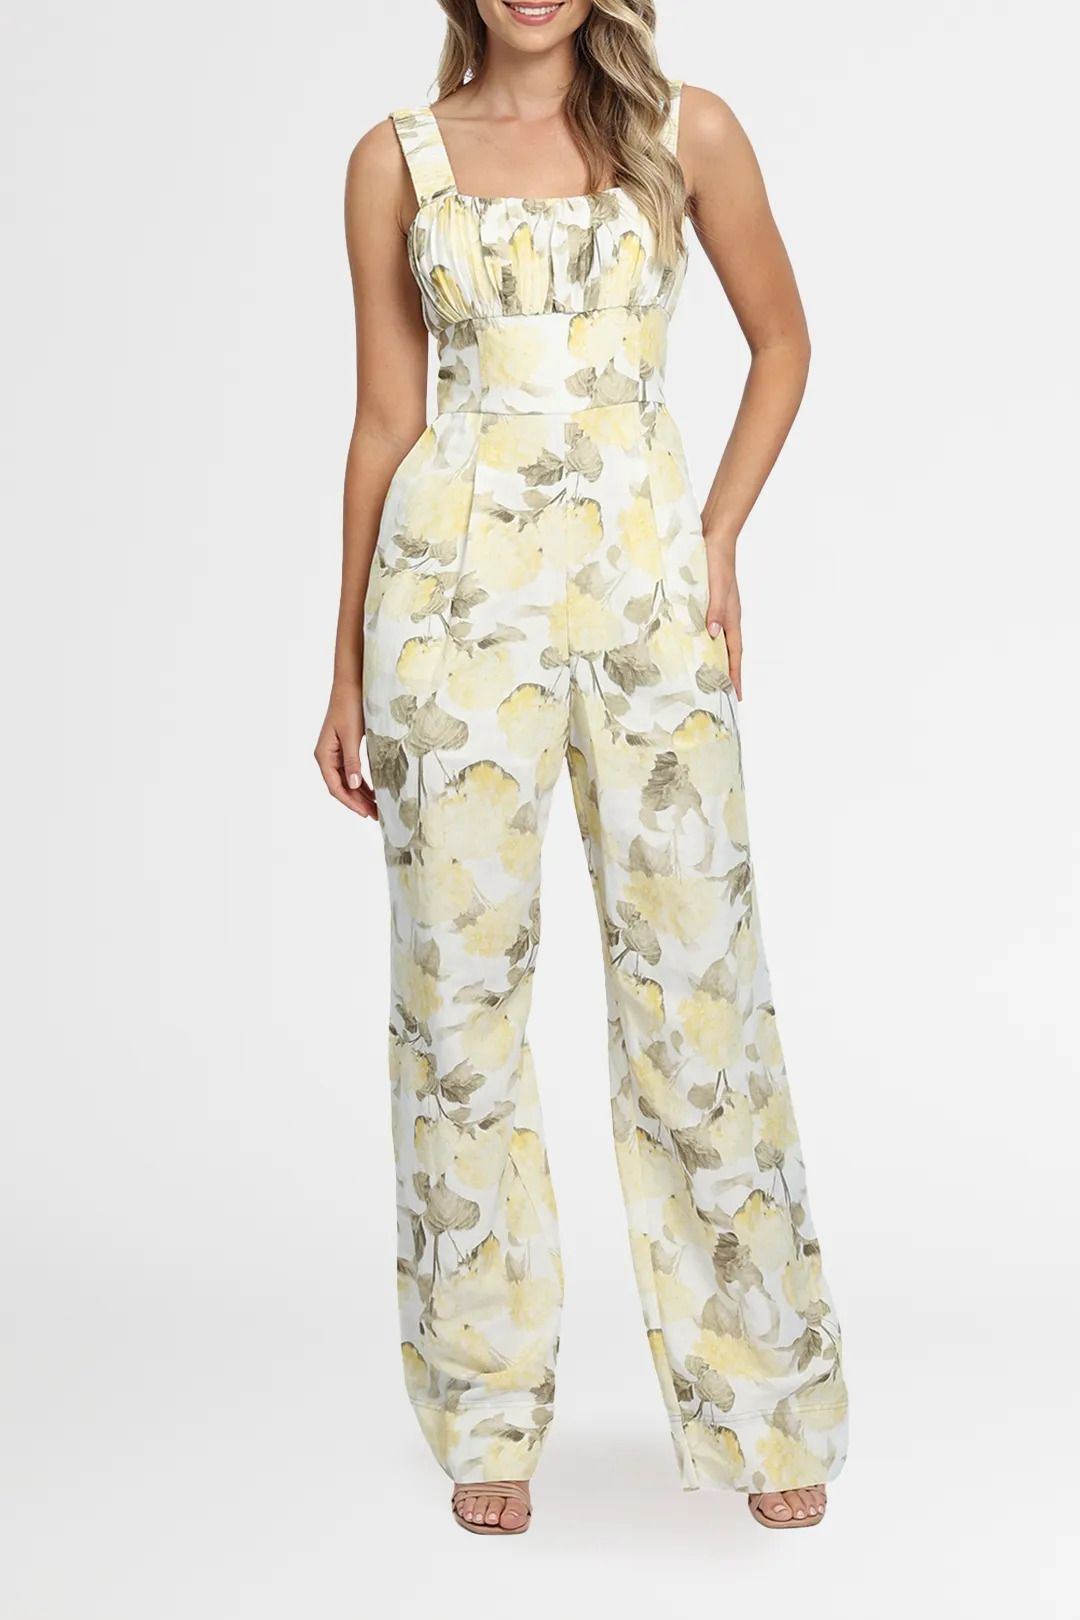 Hire Exeter jumpsuit for wedding guests.